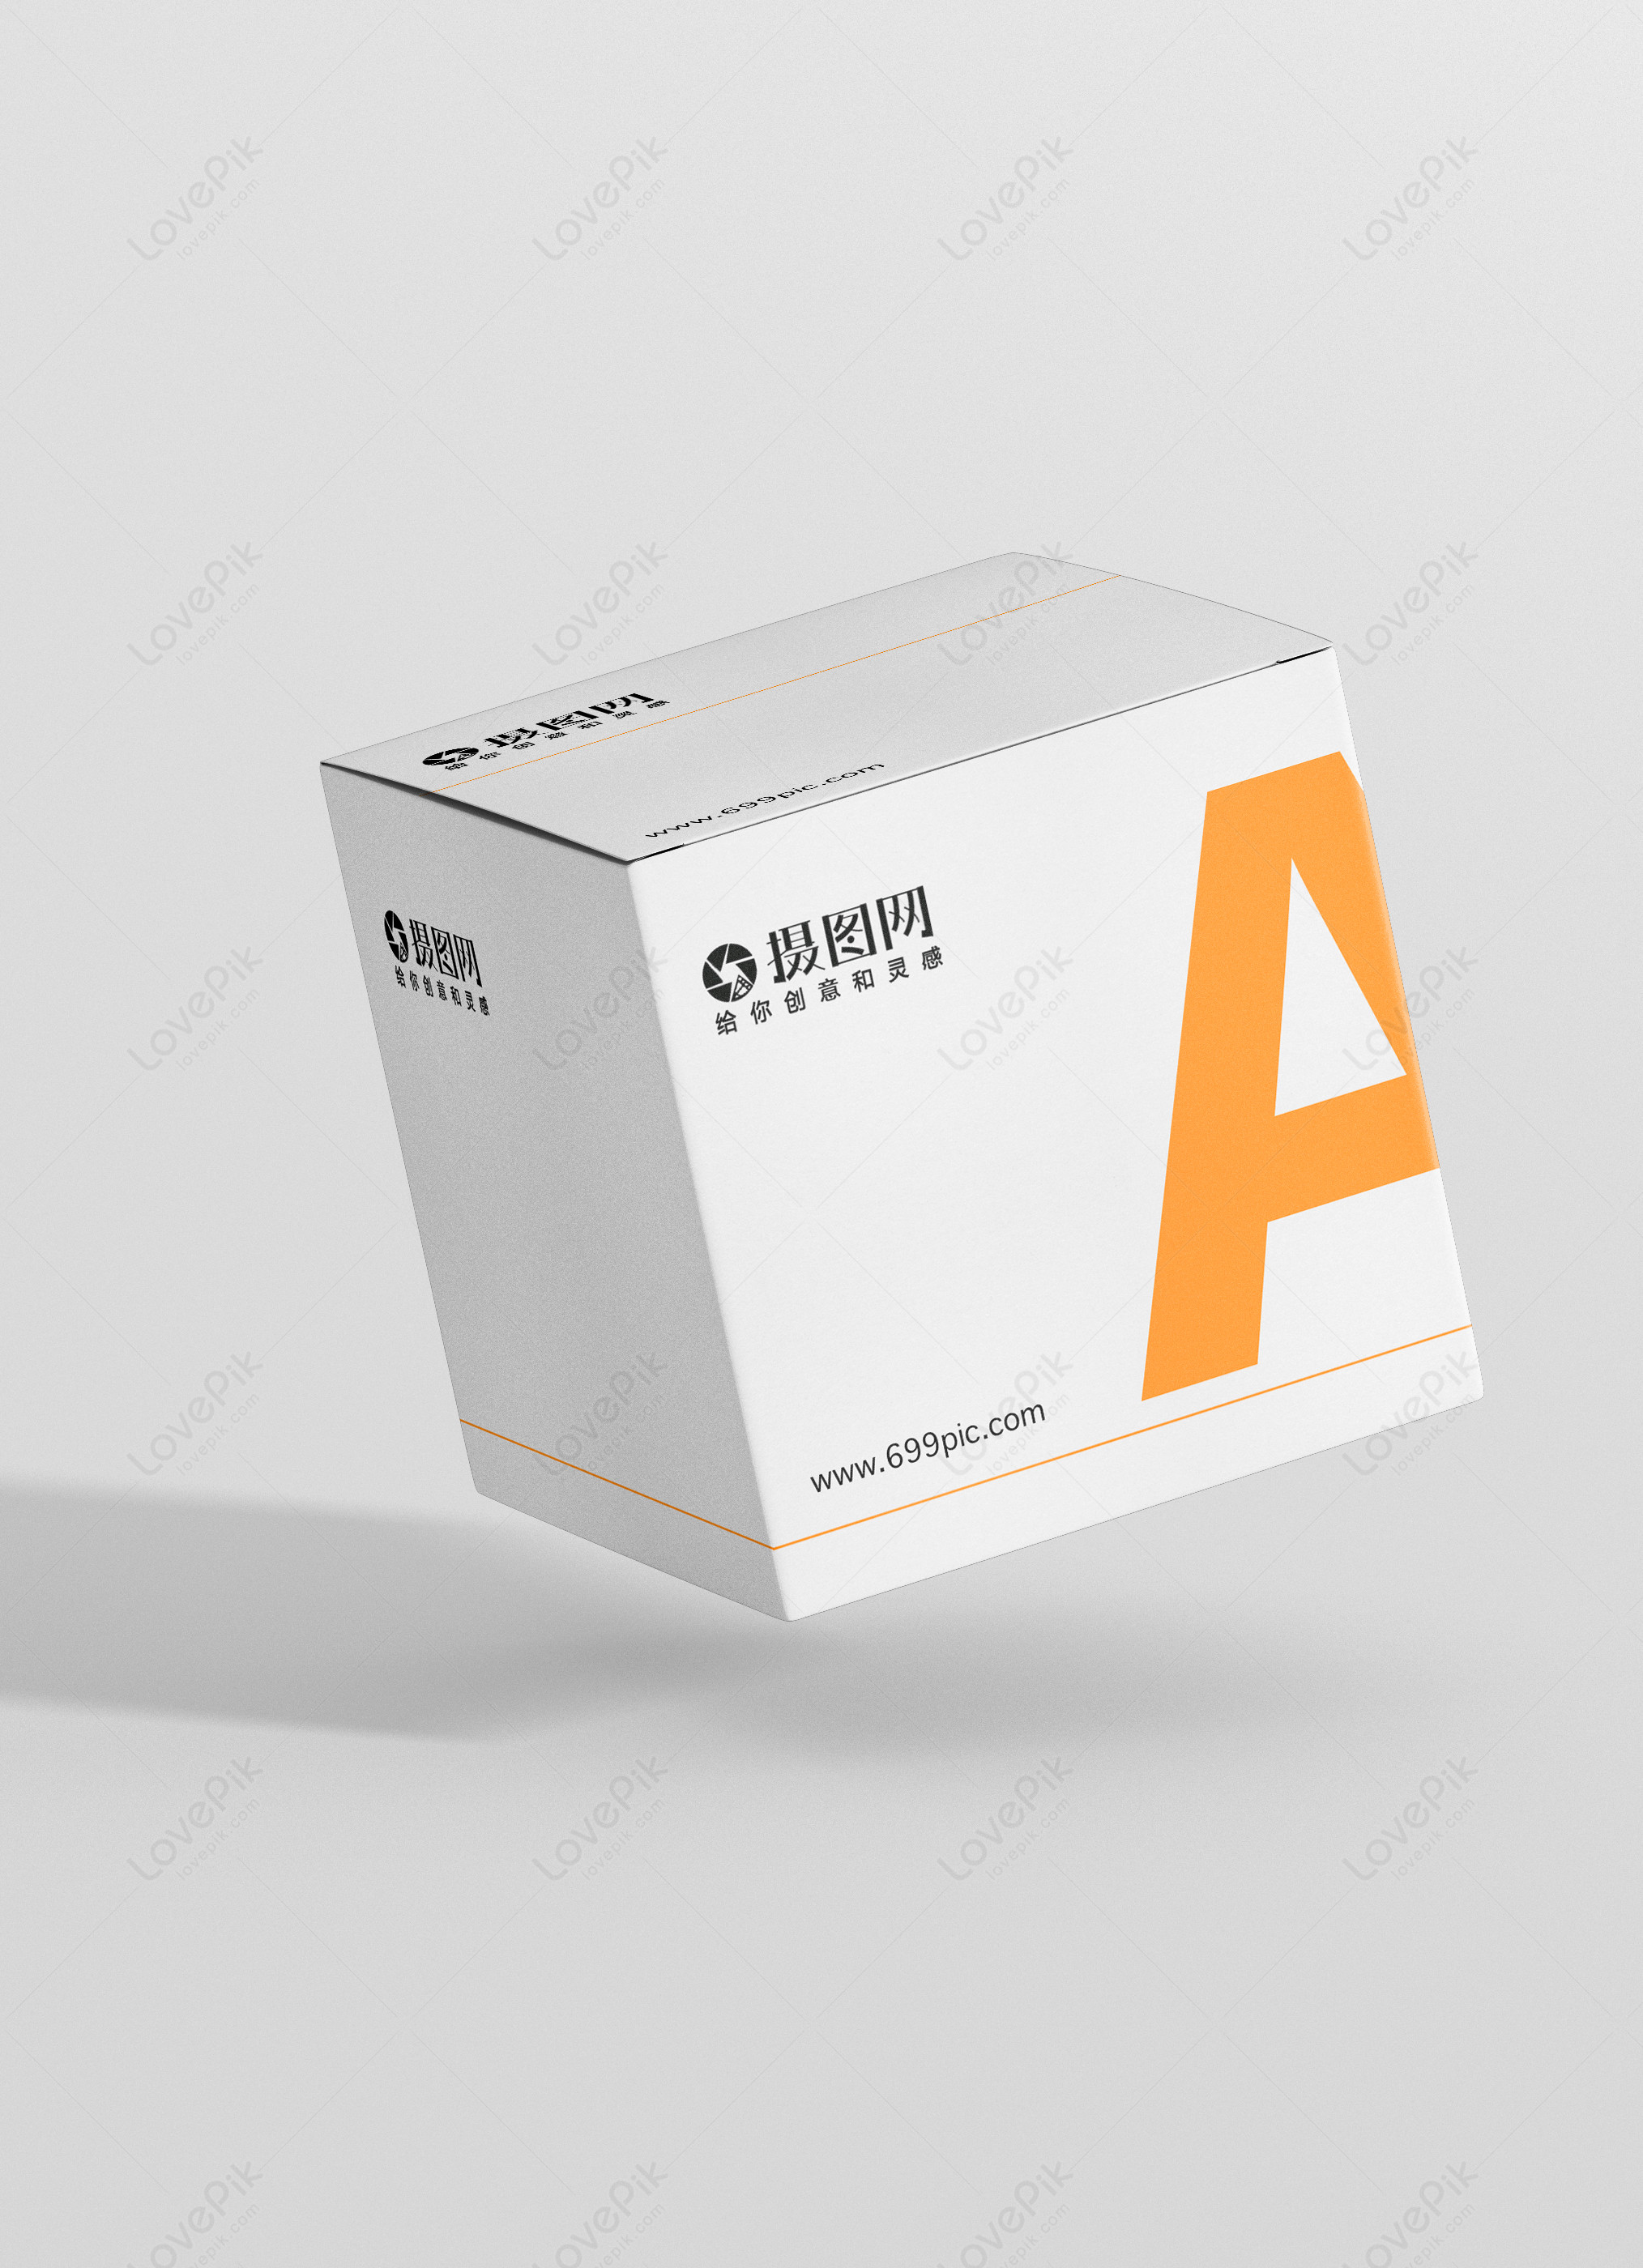 Square box mockup template image_picture free download ...